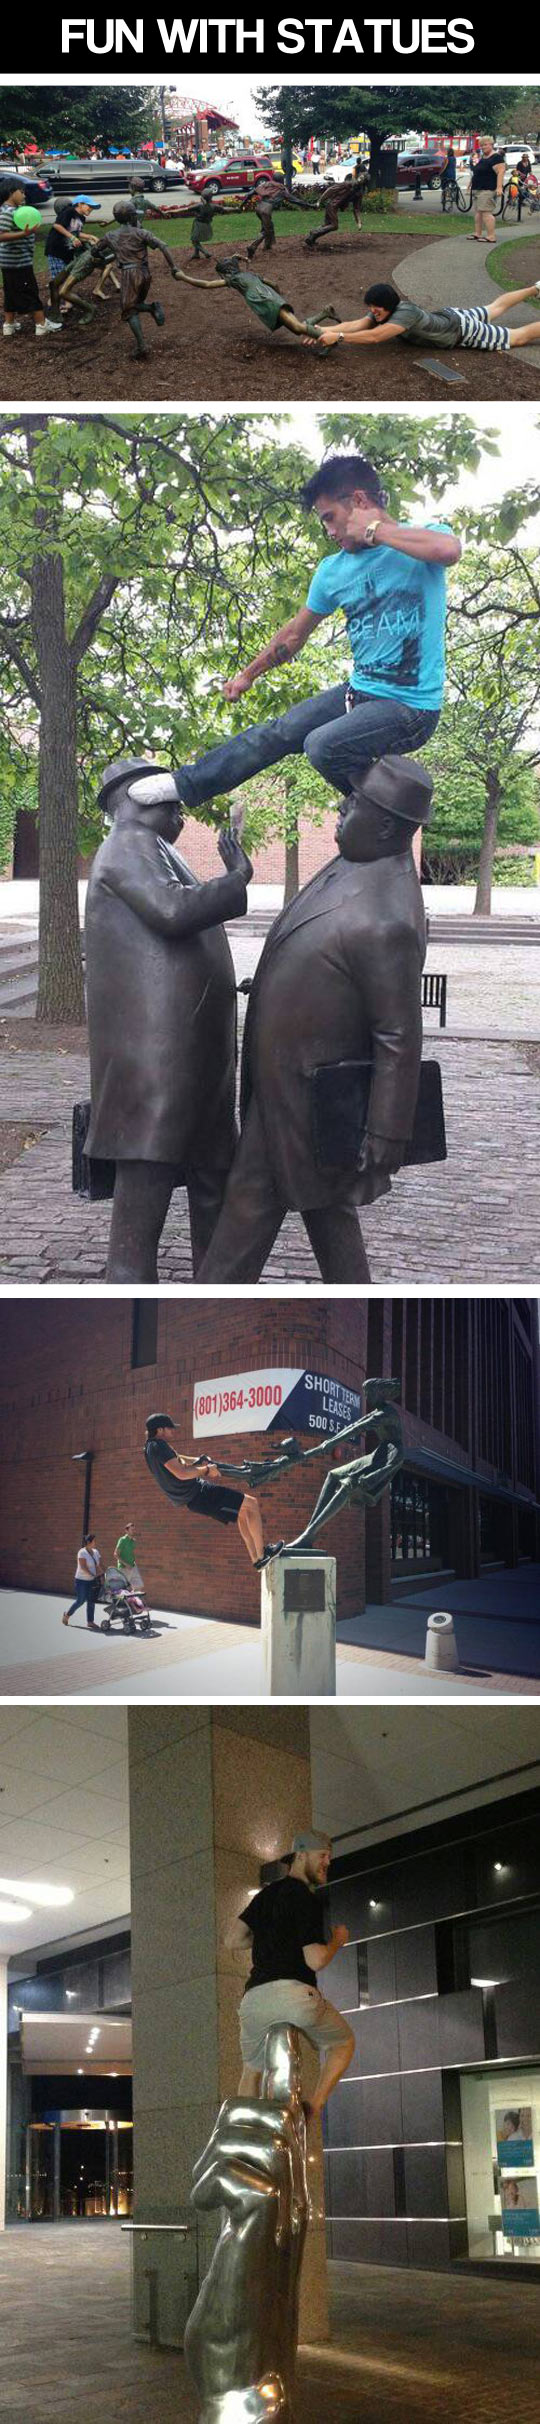 Fun with statues...